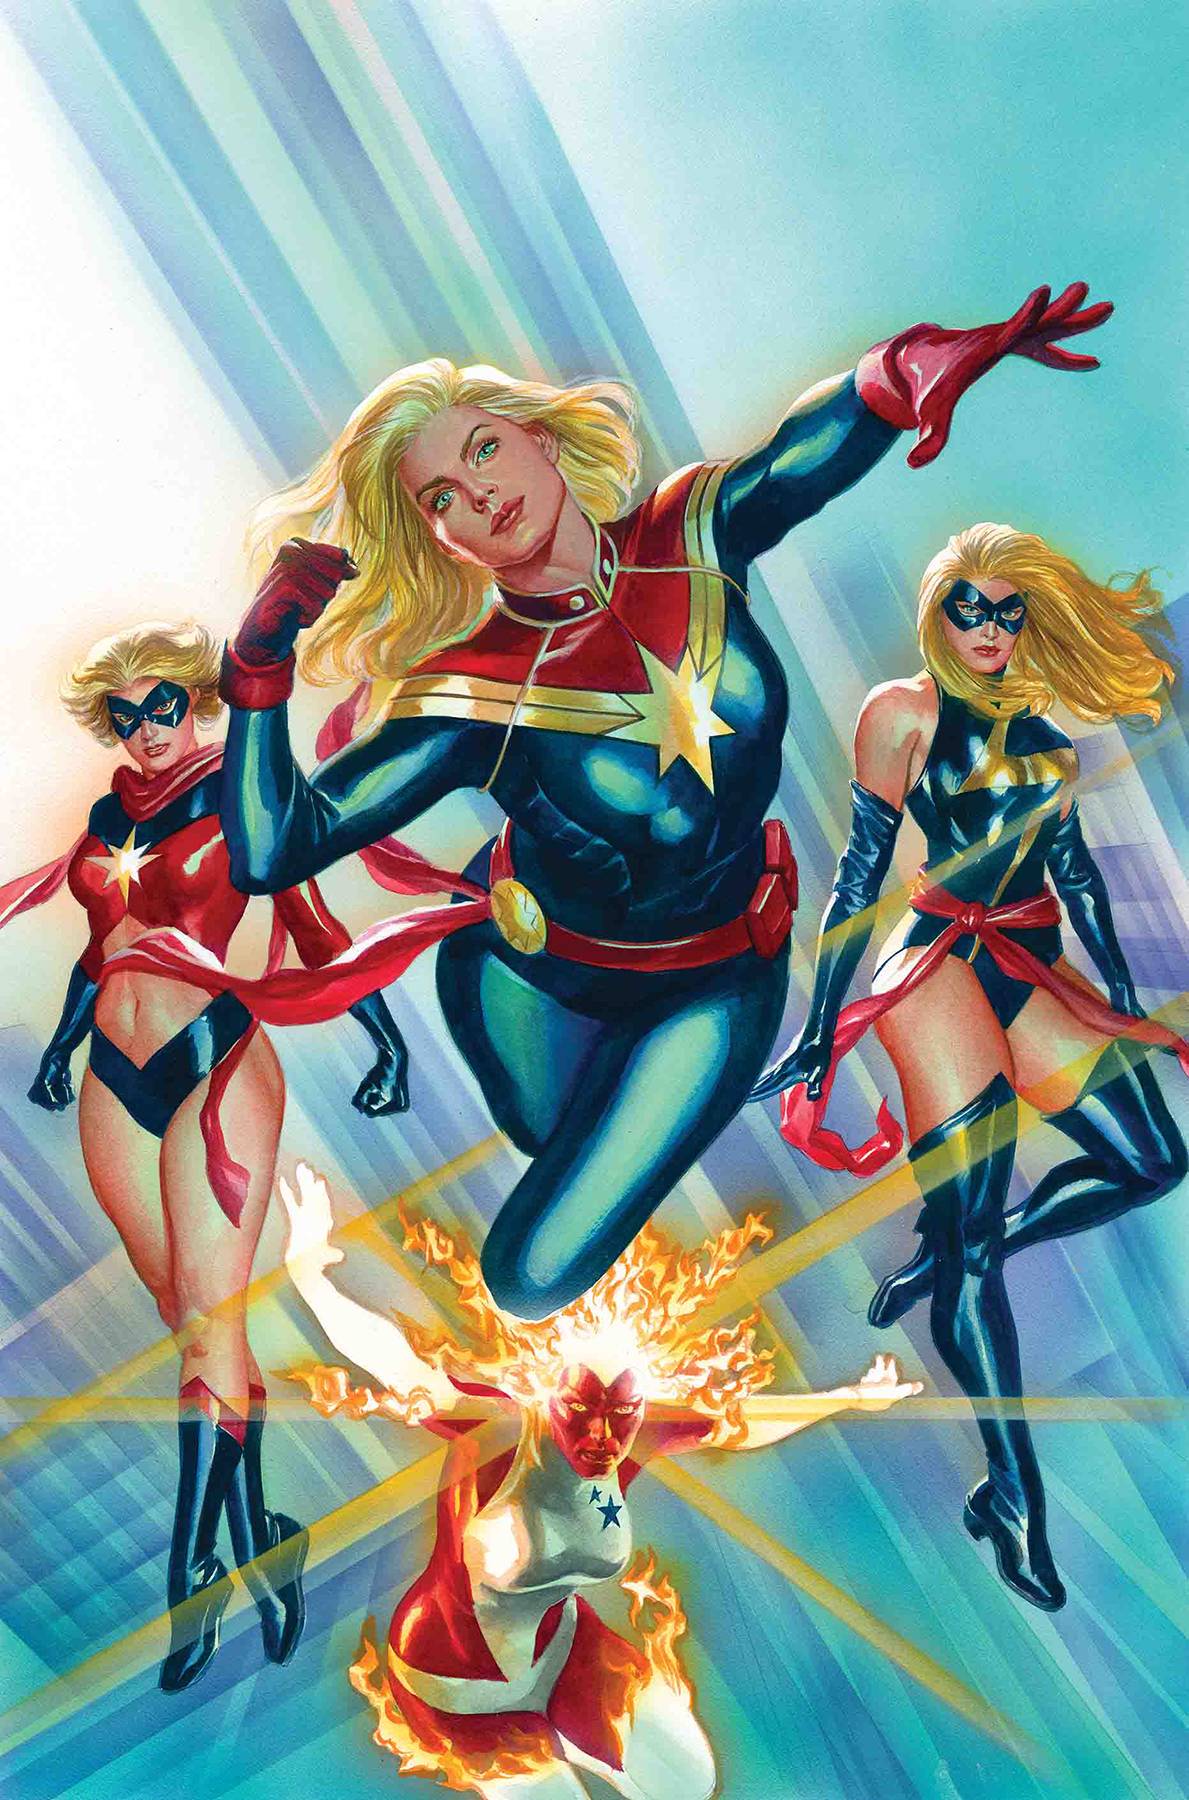 CAPTAIN MARVEL #1 BY ALEX ROSS POSTER